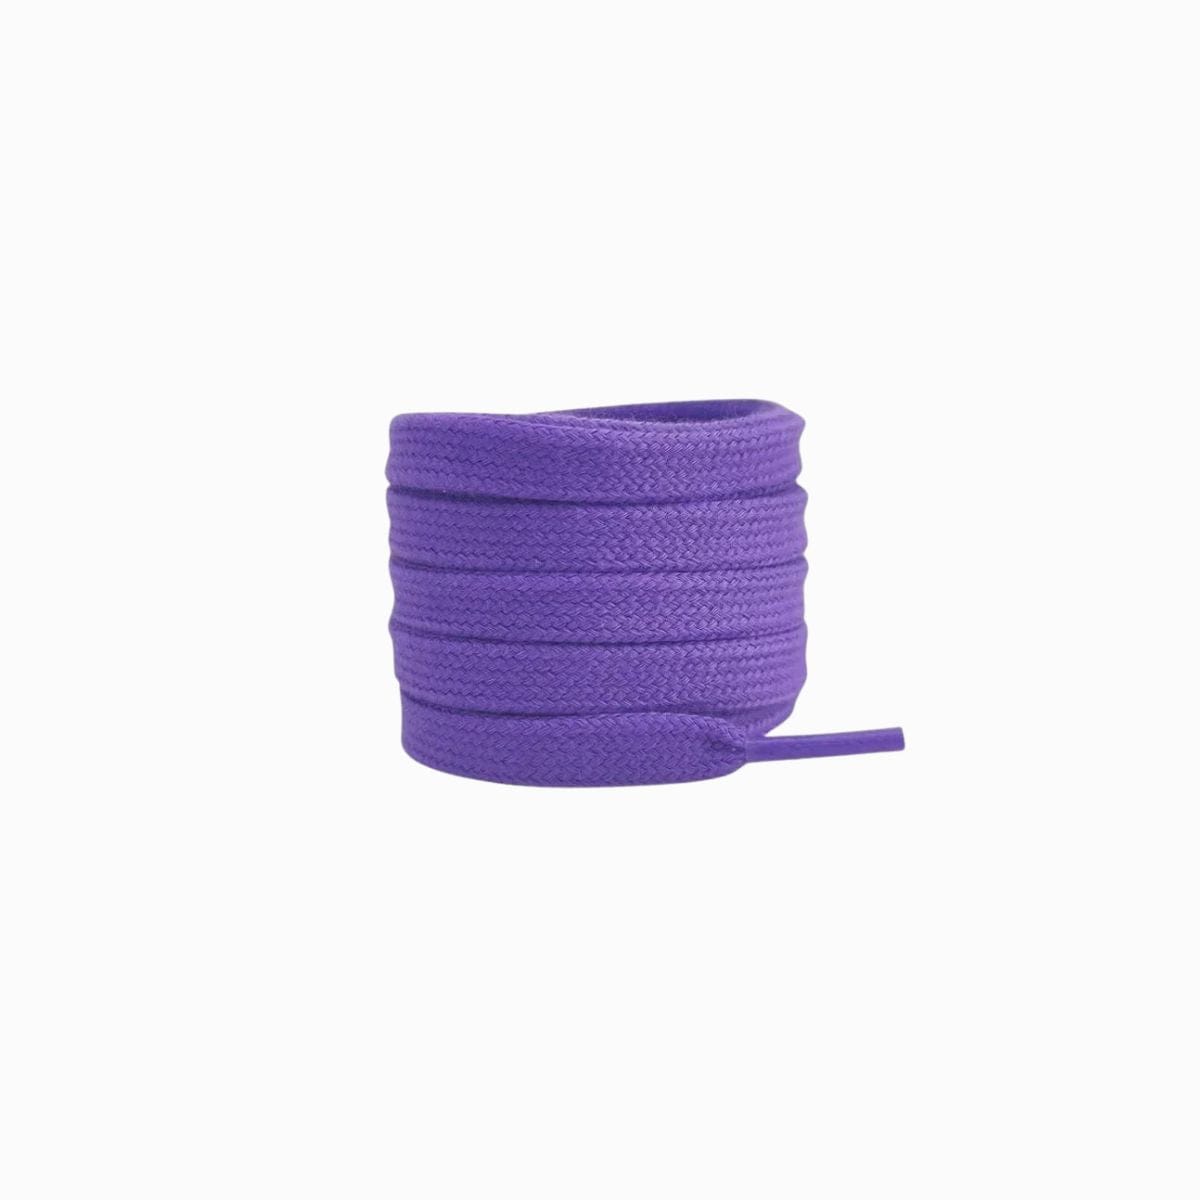 Purple Replacement Adidas Shoe Laces for Adidas Samba Black Sneakers by Kicks Shoelaces